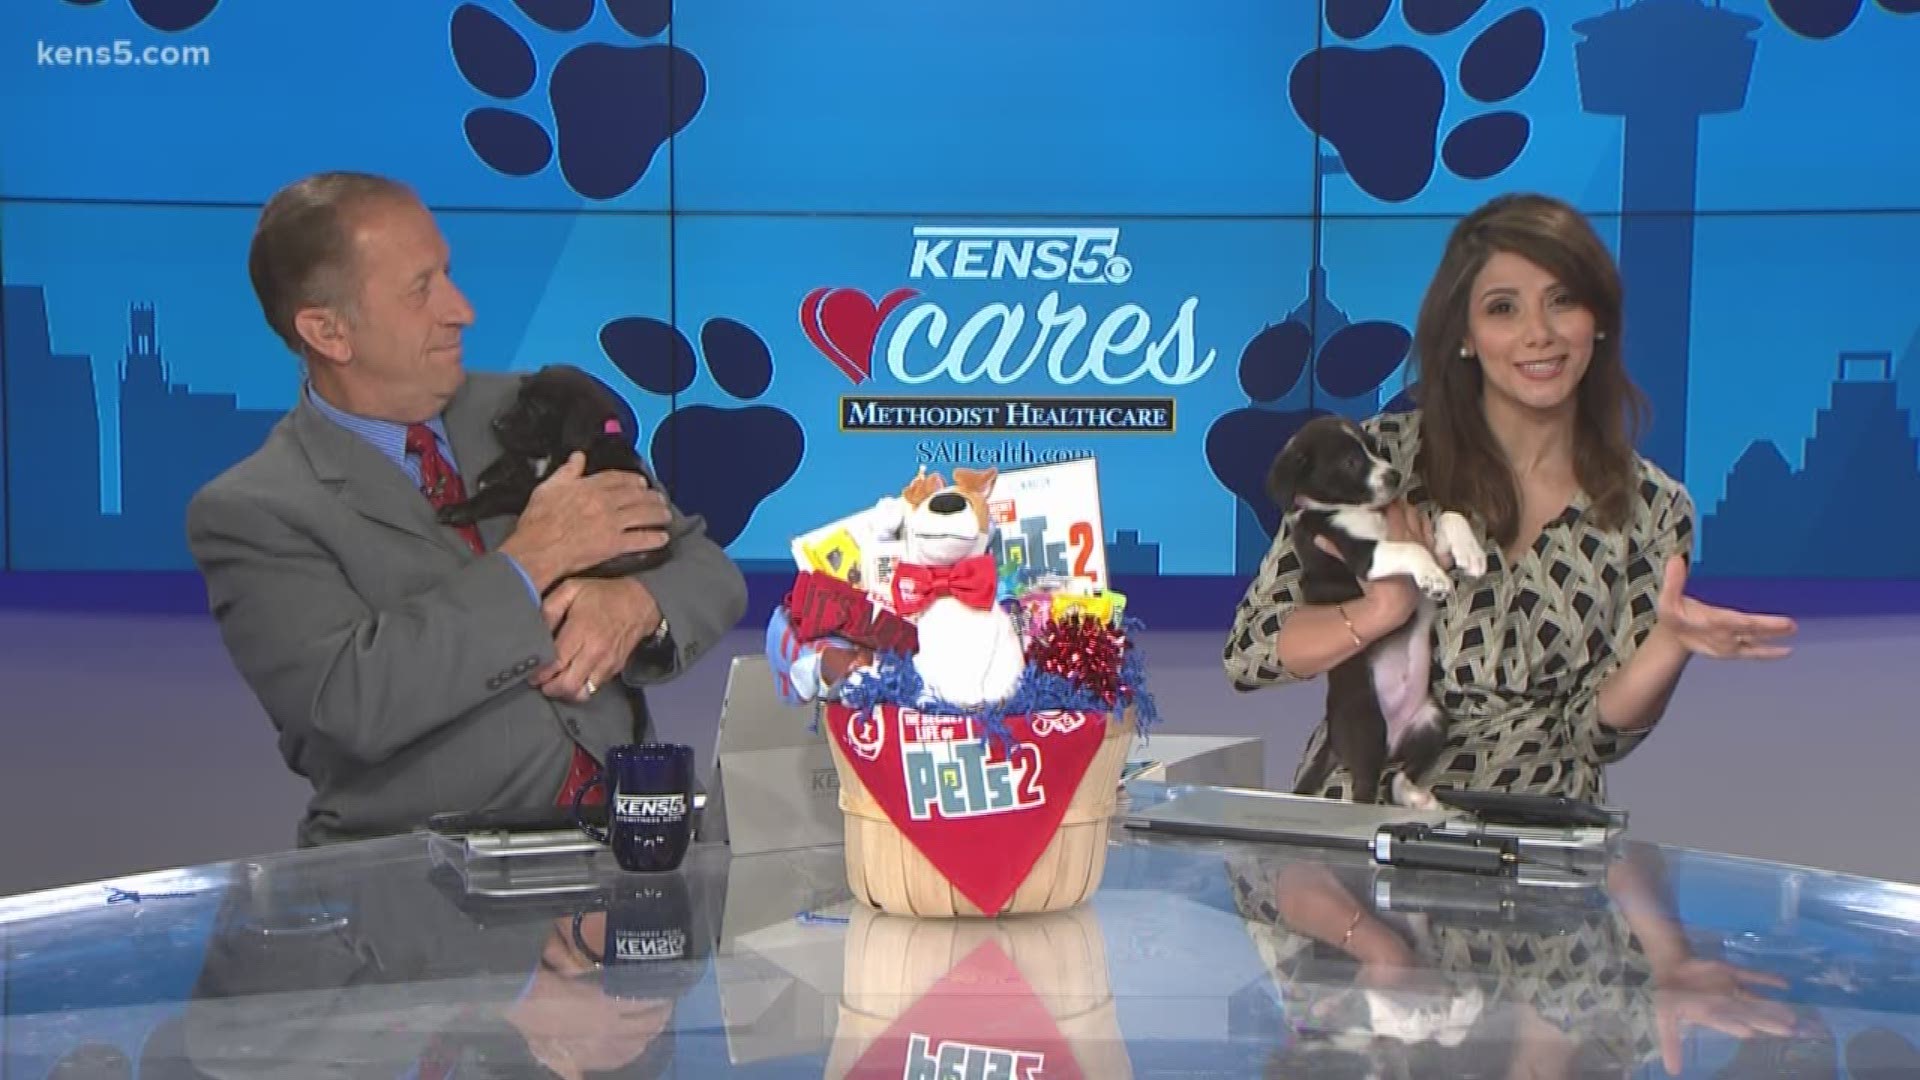 KENS 5 morning anchors Barry Davis and Sarah Forgany play with some cute pups on set while discussing the new film, The Secret Life of Pets 2.